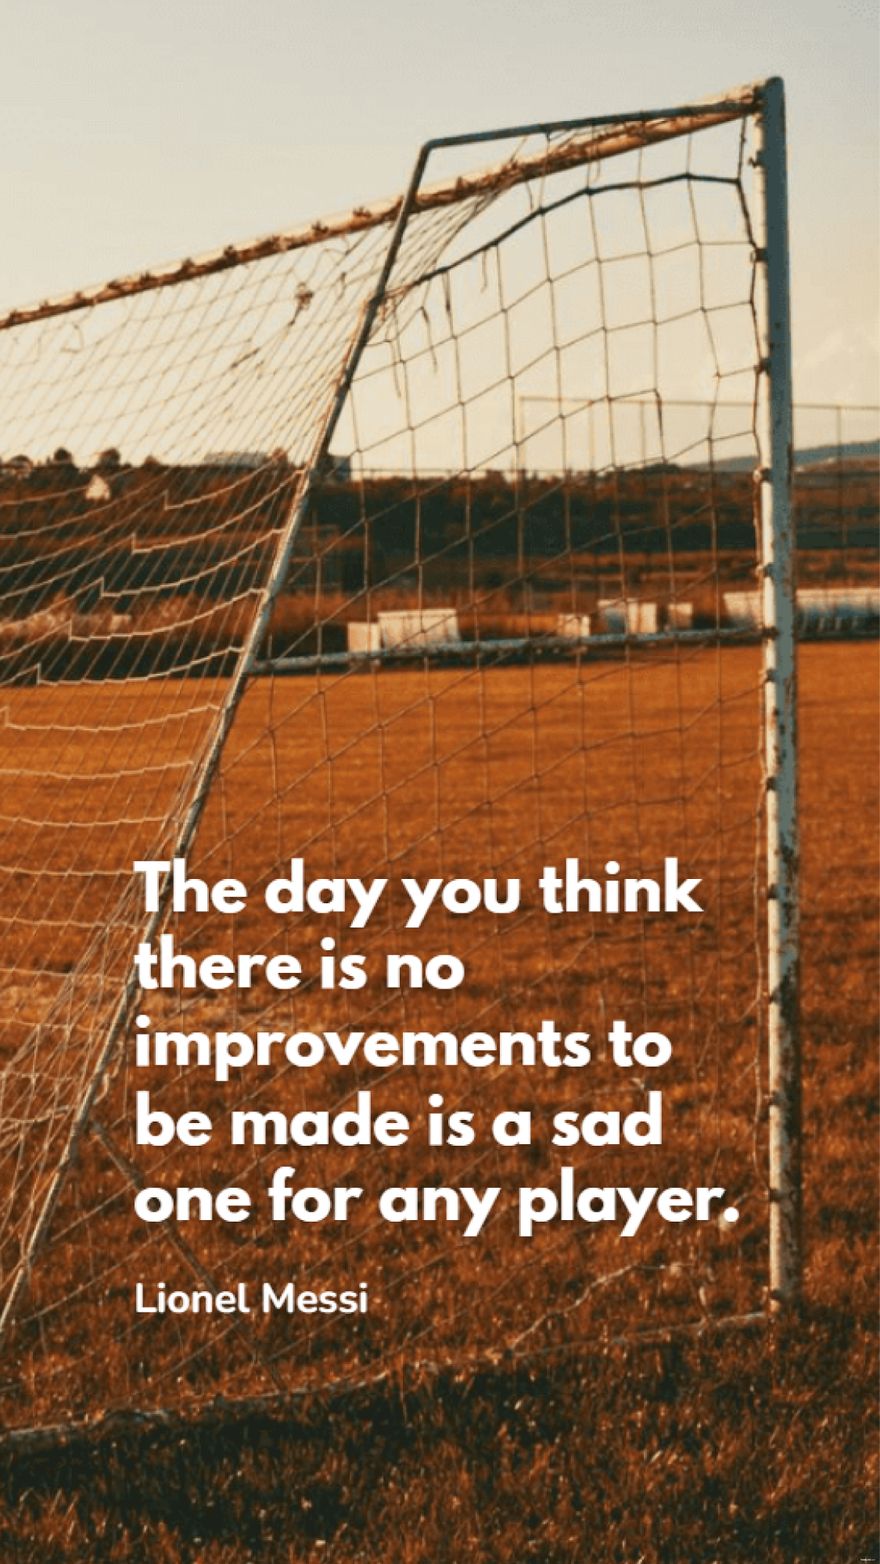 Lionel Messi - The day you think there is no improvements to be made is a sad one for any player.